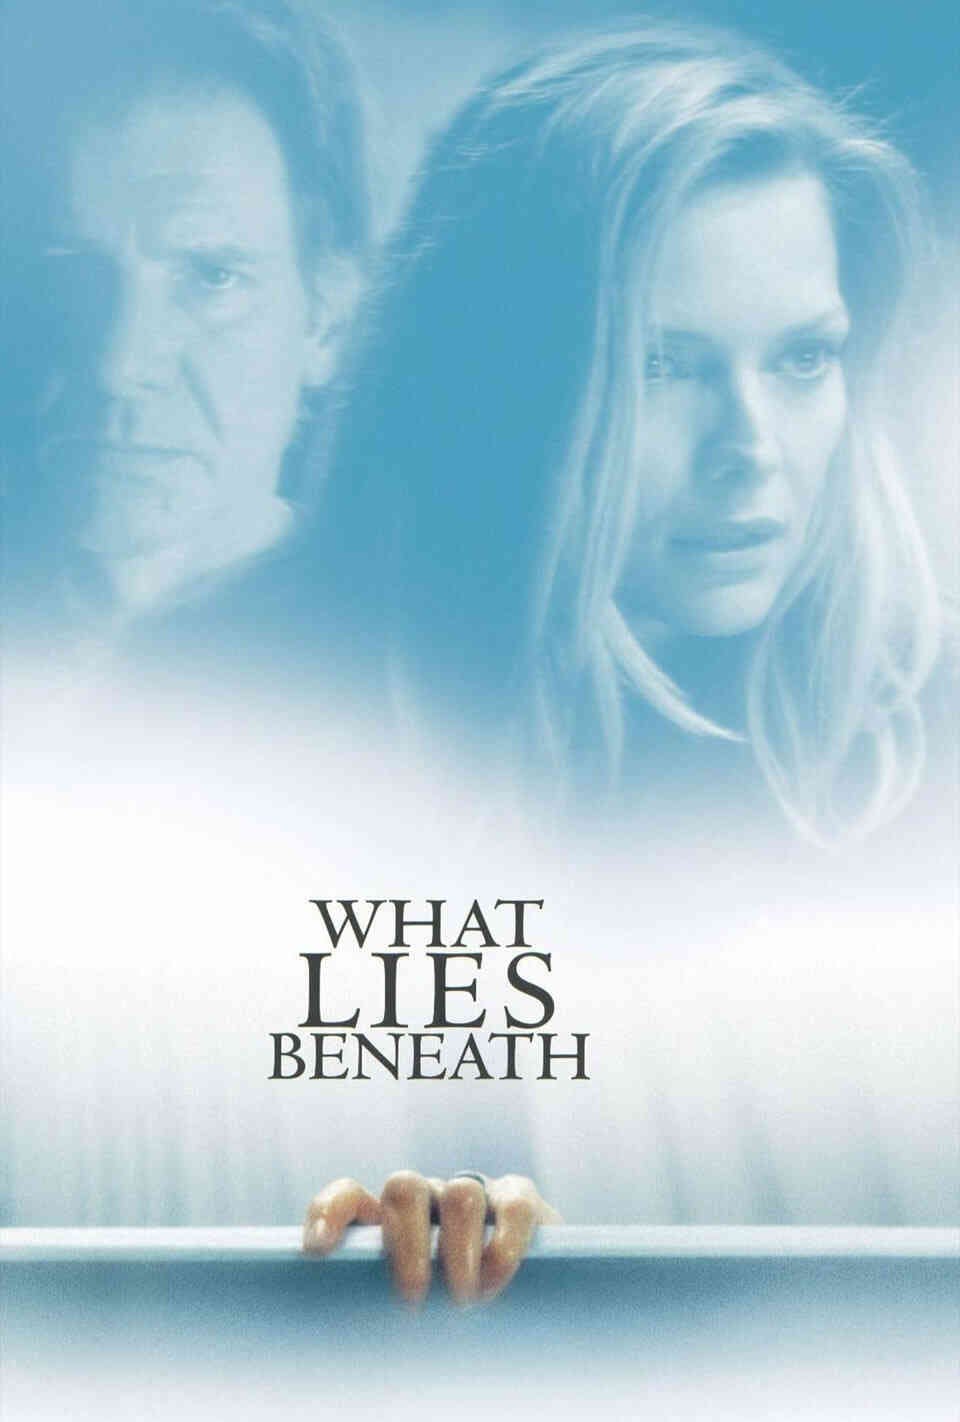 Read What Lies Beneath screenplay (poster)